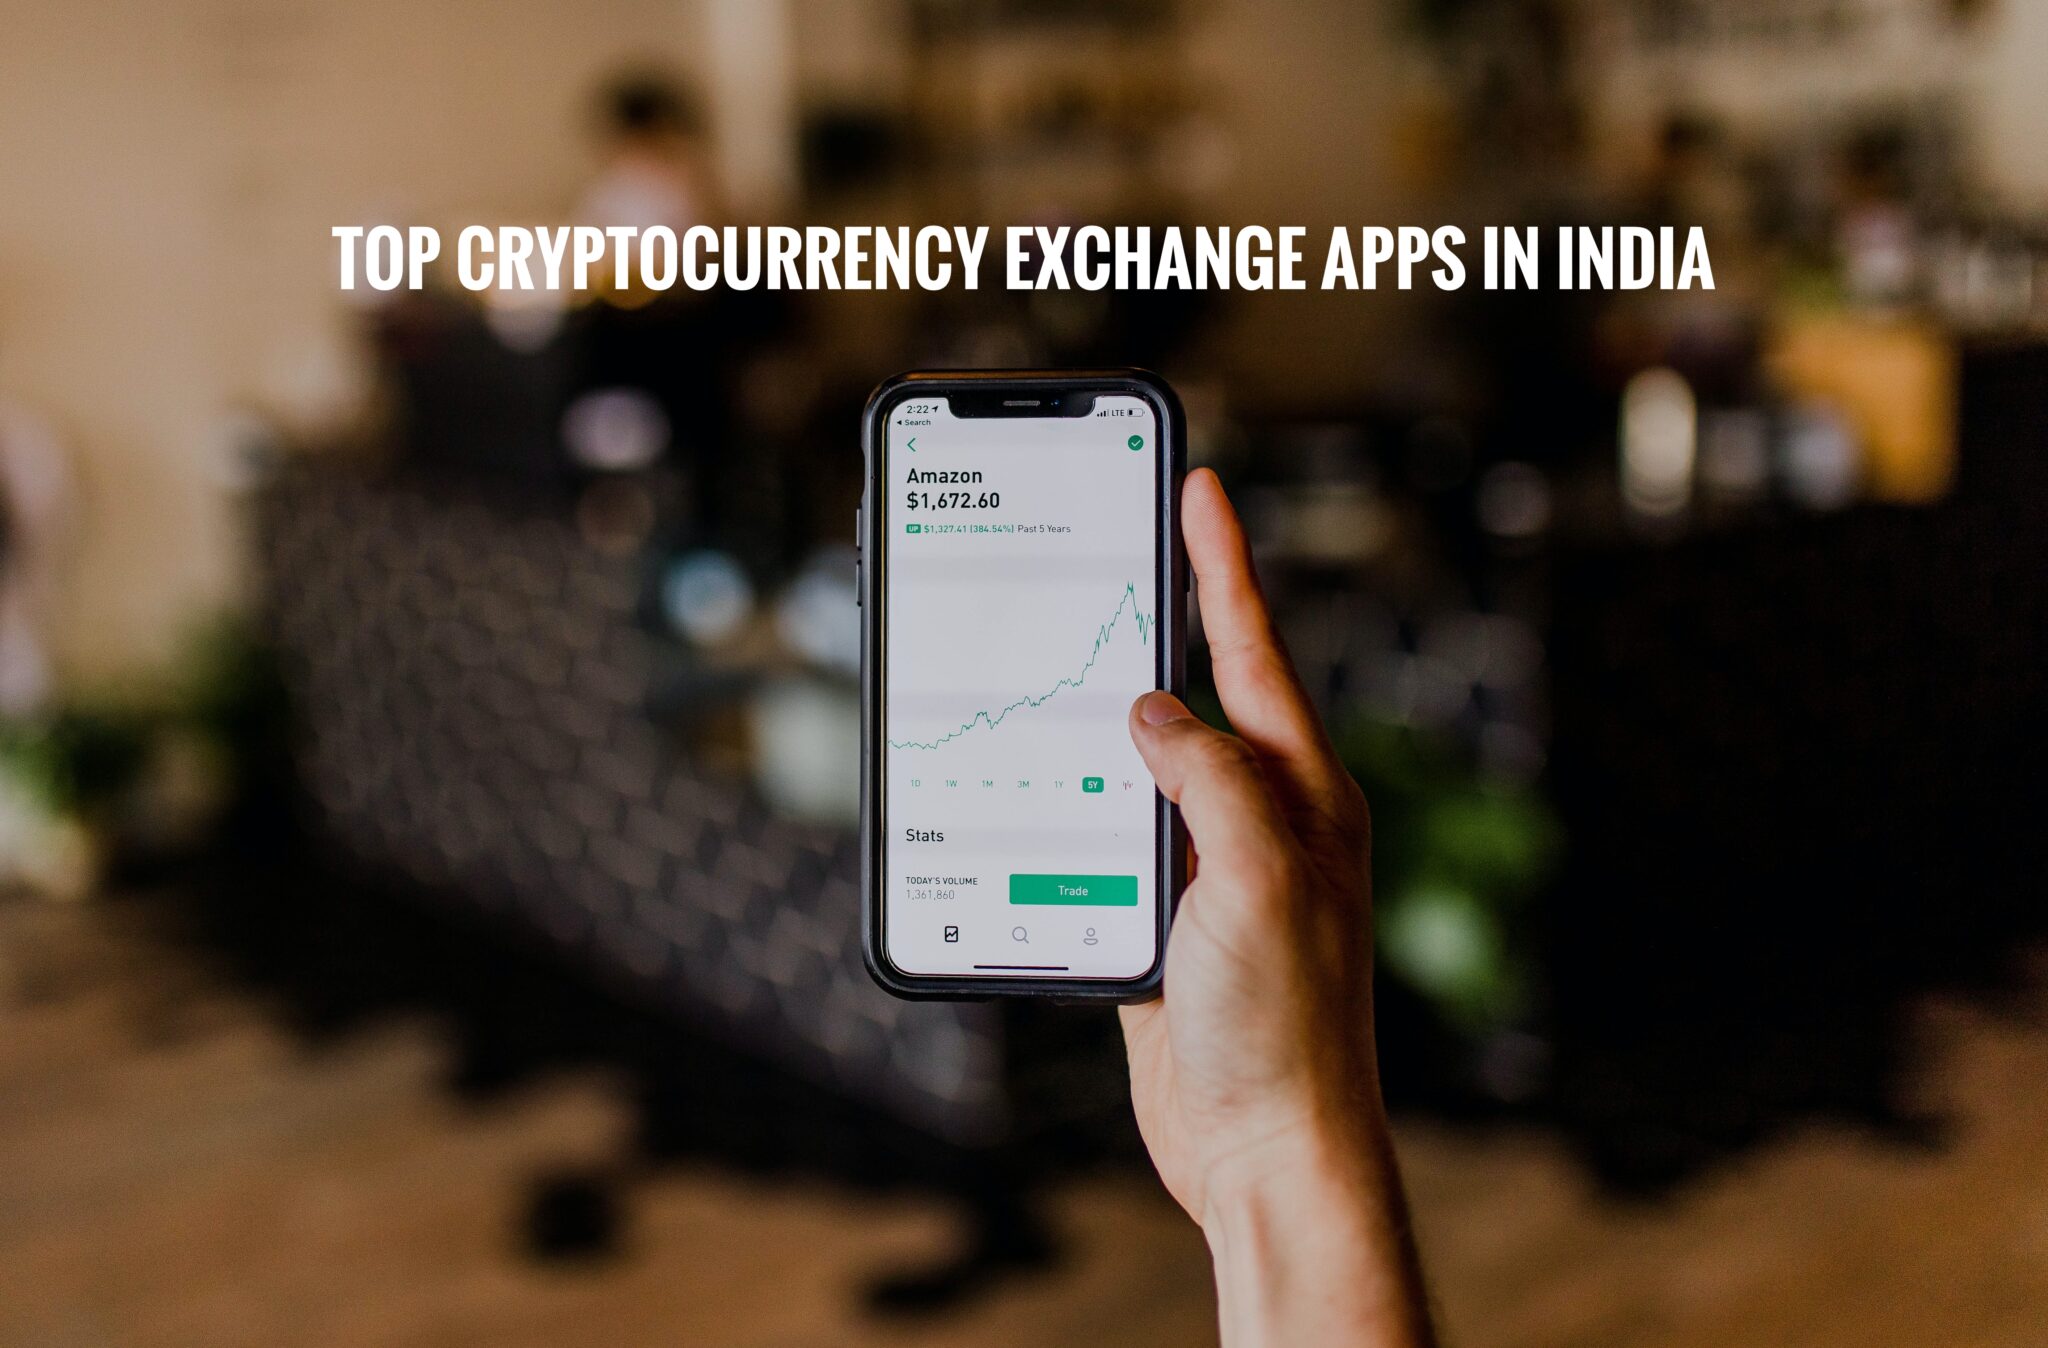 which app is best for investing in cryptocurrency in india